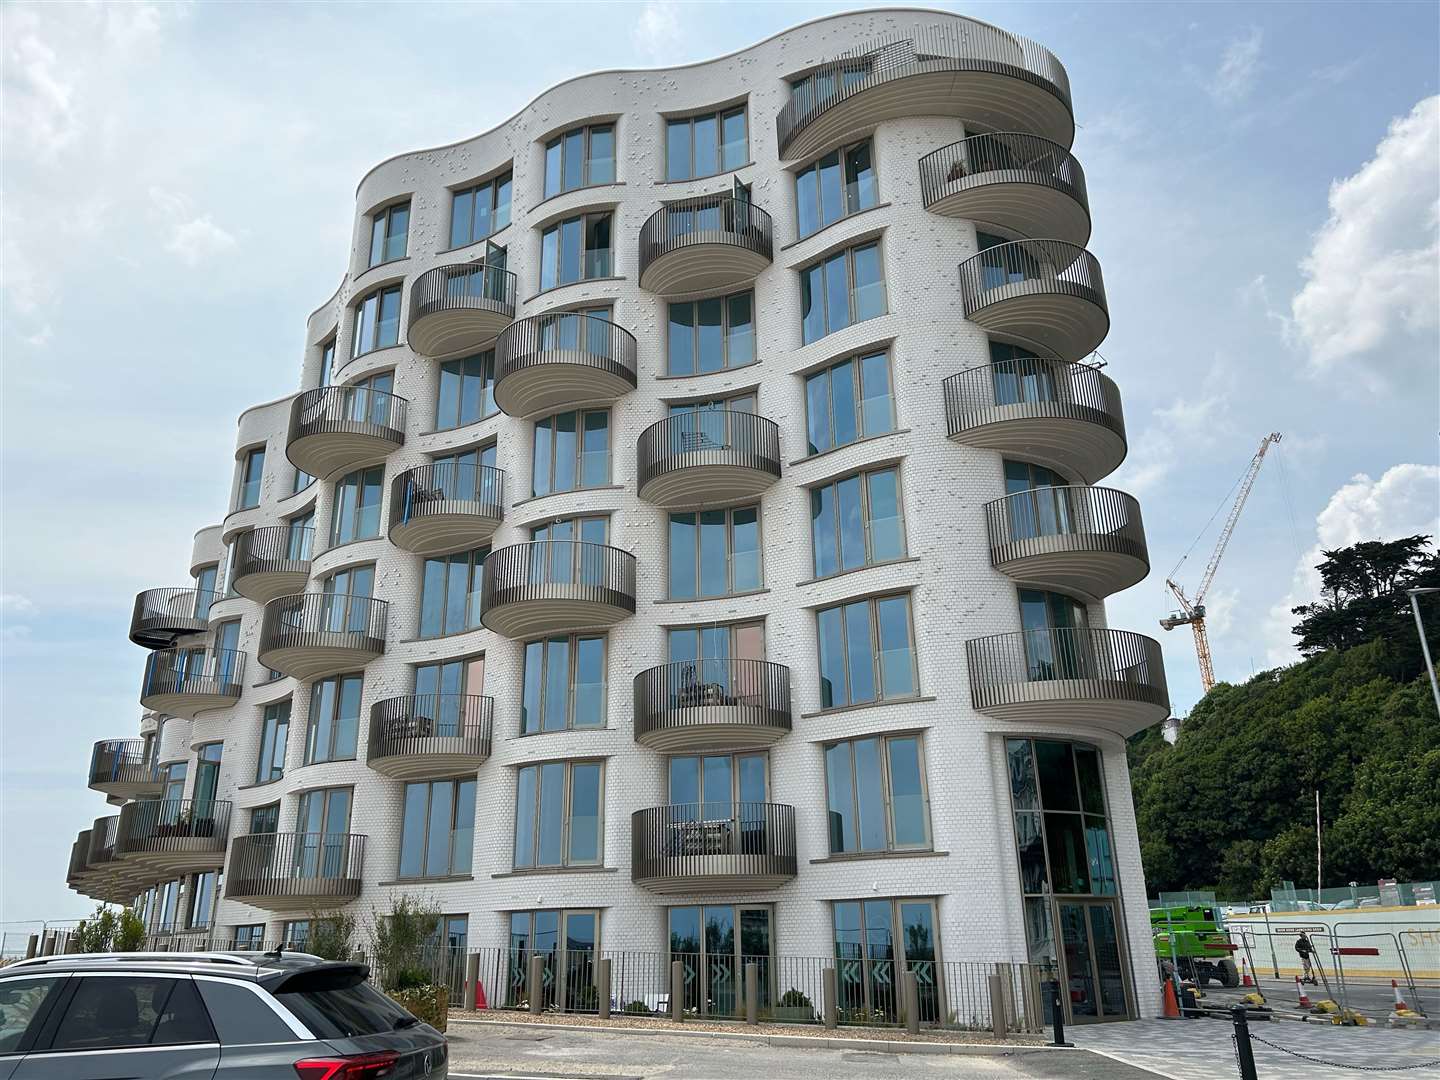 The Shoreline Crescent development on Folkestone seafront – where prices will start from £430,000